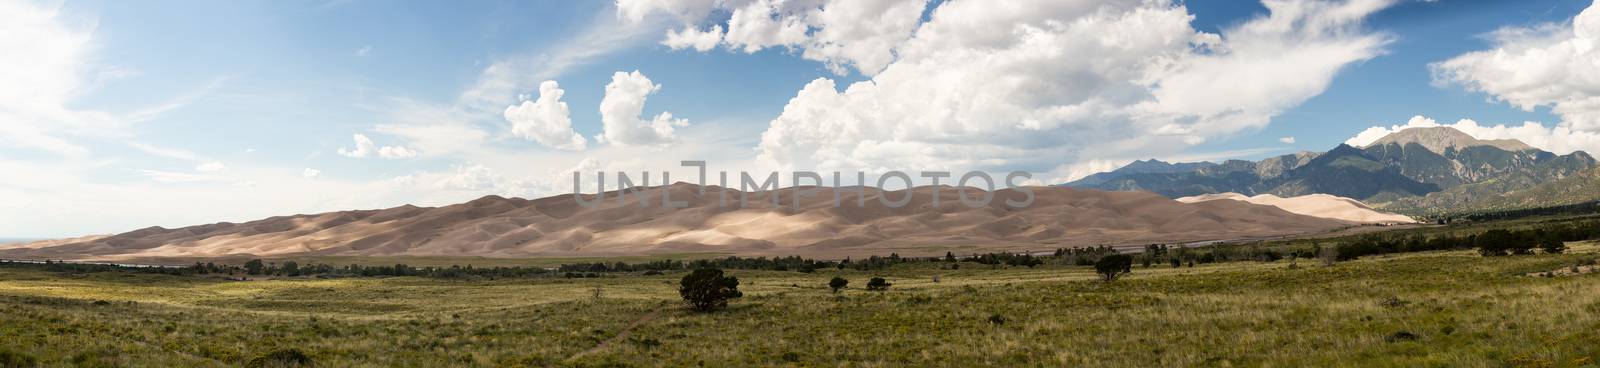 Panorama of Great Sand Dunes NP  by steheap